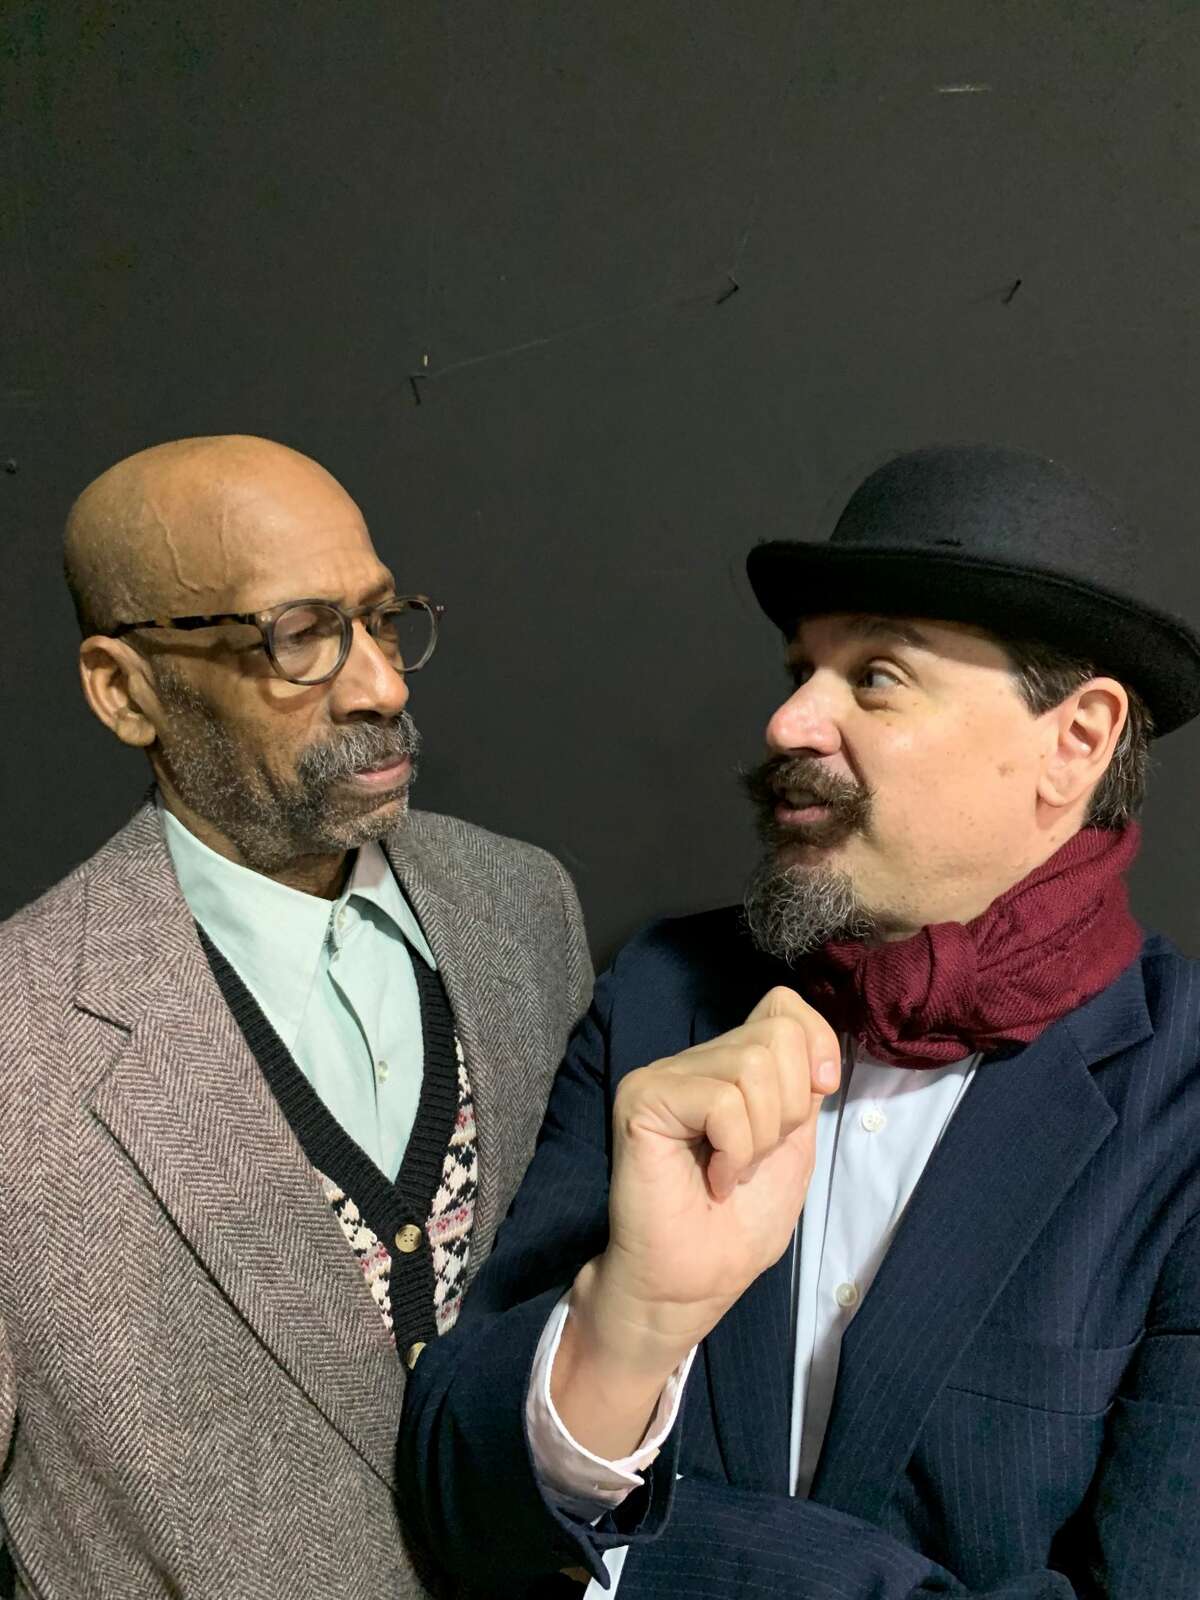 Dr. Bernard (Emmett Ferris) shows some skepticism at the theories posed by Hercule Poirot (John Michael Decker) in iTheatre Saratoga’s Poirots Investigate. Credits: iTheatre Saratoga